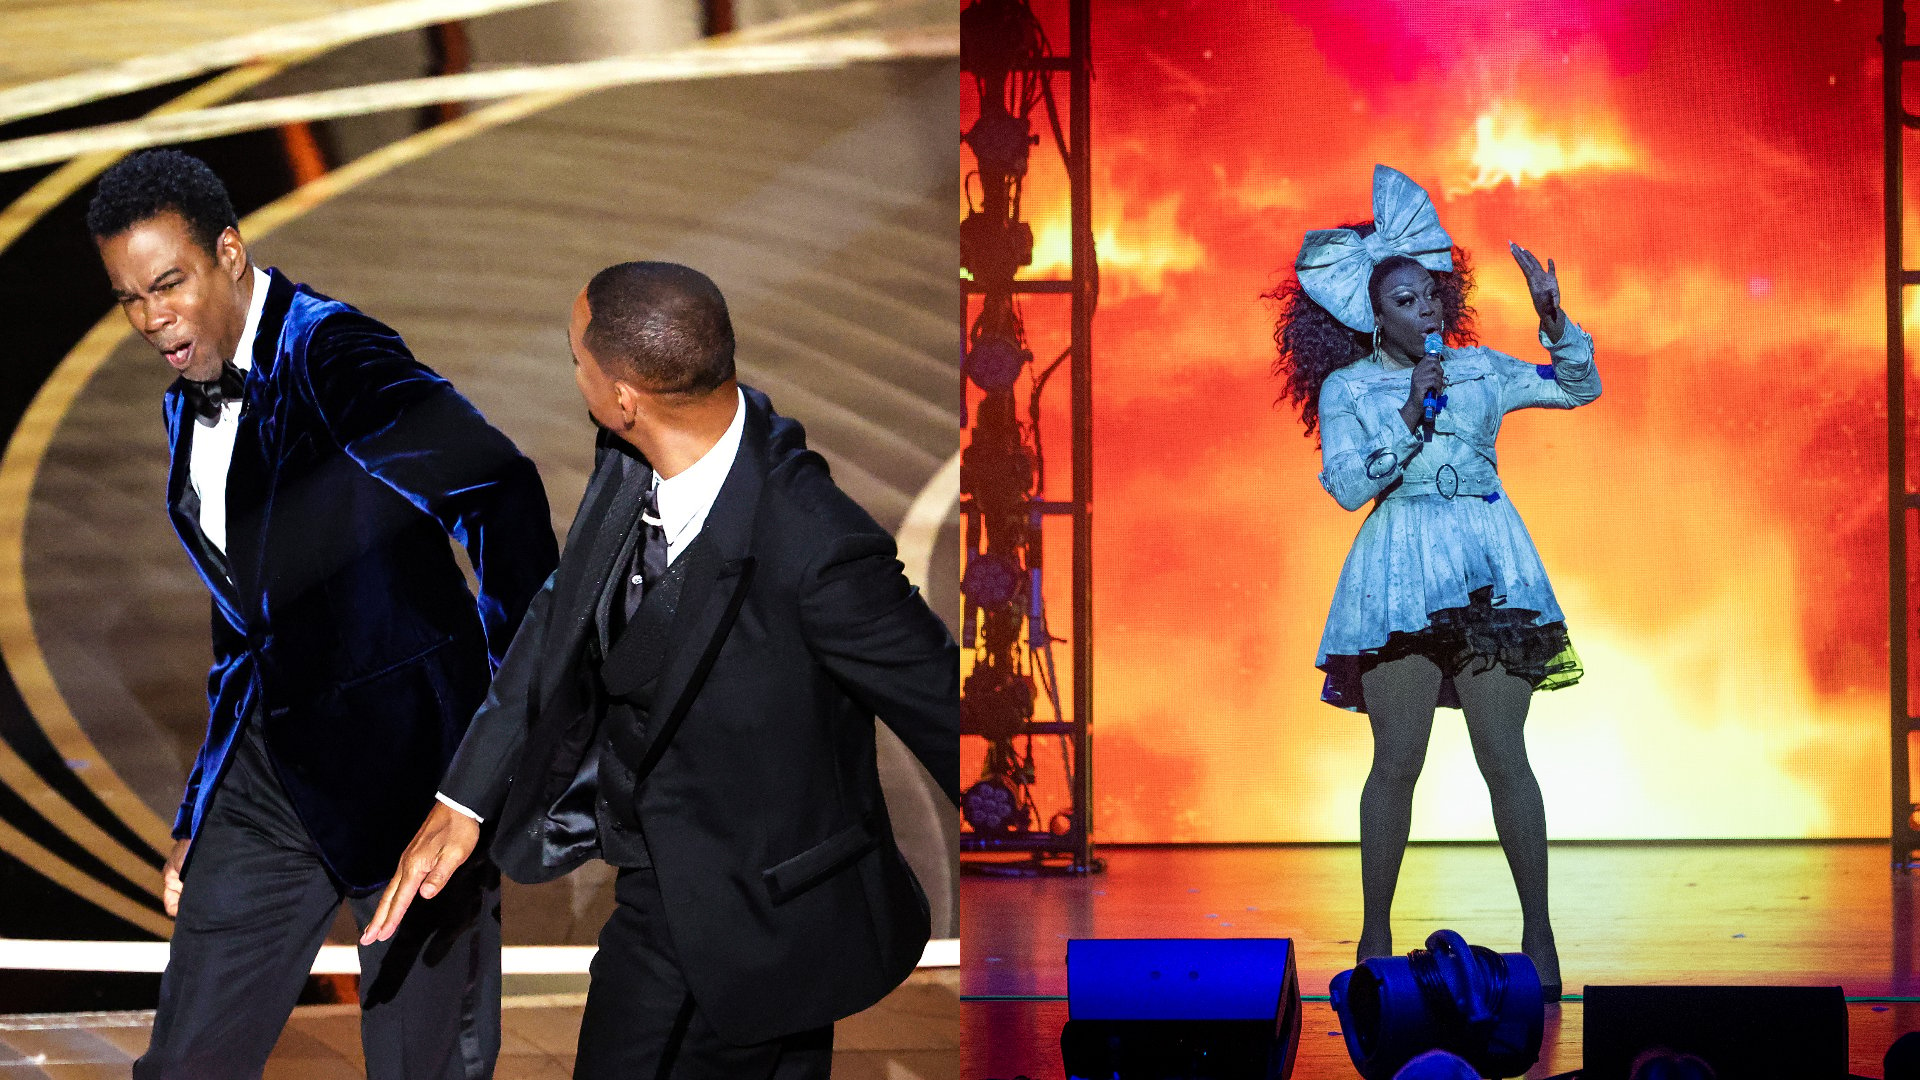 Left: Will Smith Smacks Chris Rock at the Academy Awards | Myung Chun / Los Angeles Times via Getty Image Right: Bob the Drag Queen of 'RuPaul's Drag Race' | Emma McIntyre/Getty Images